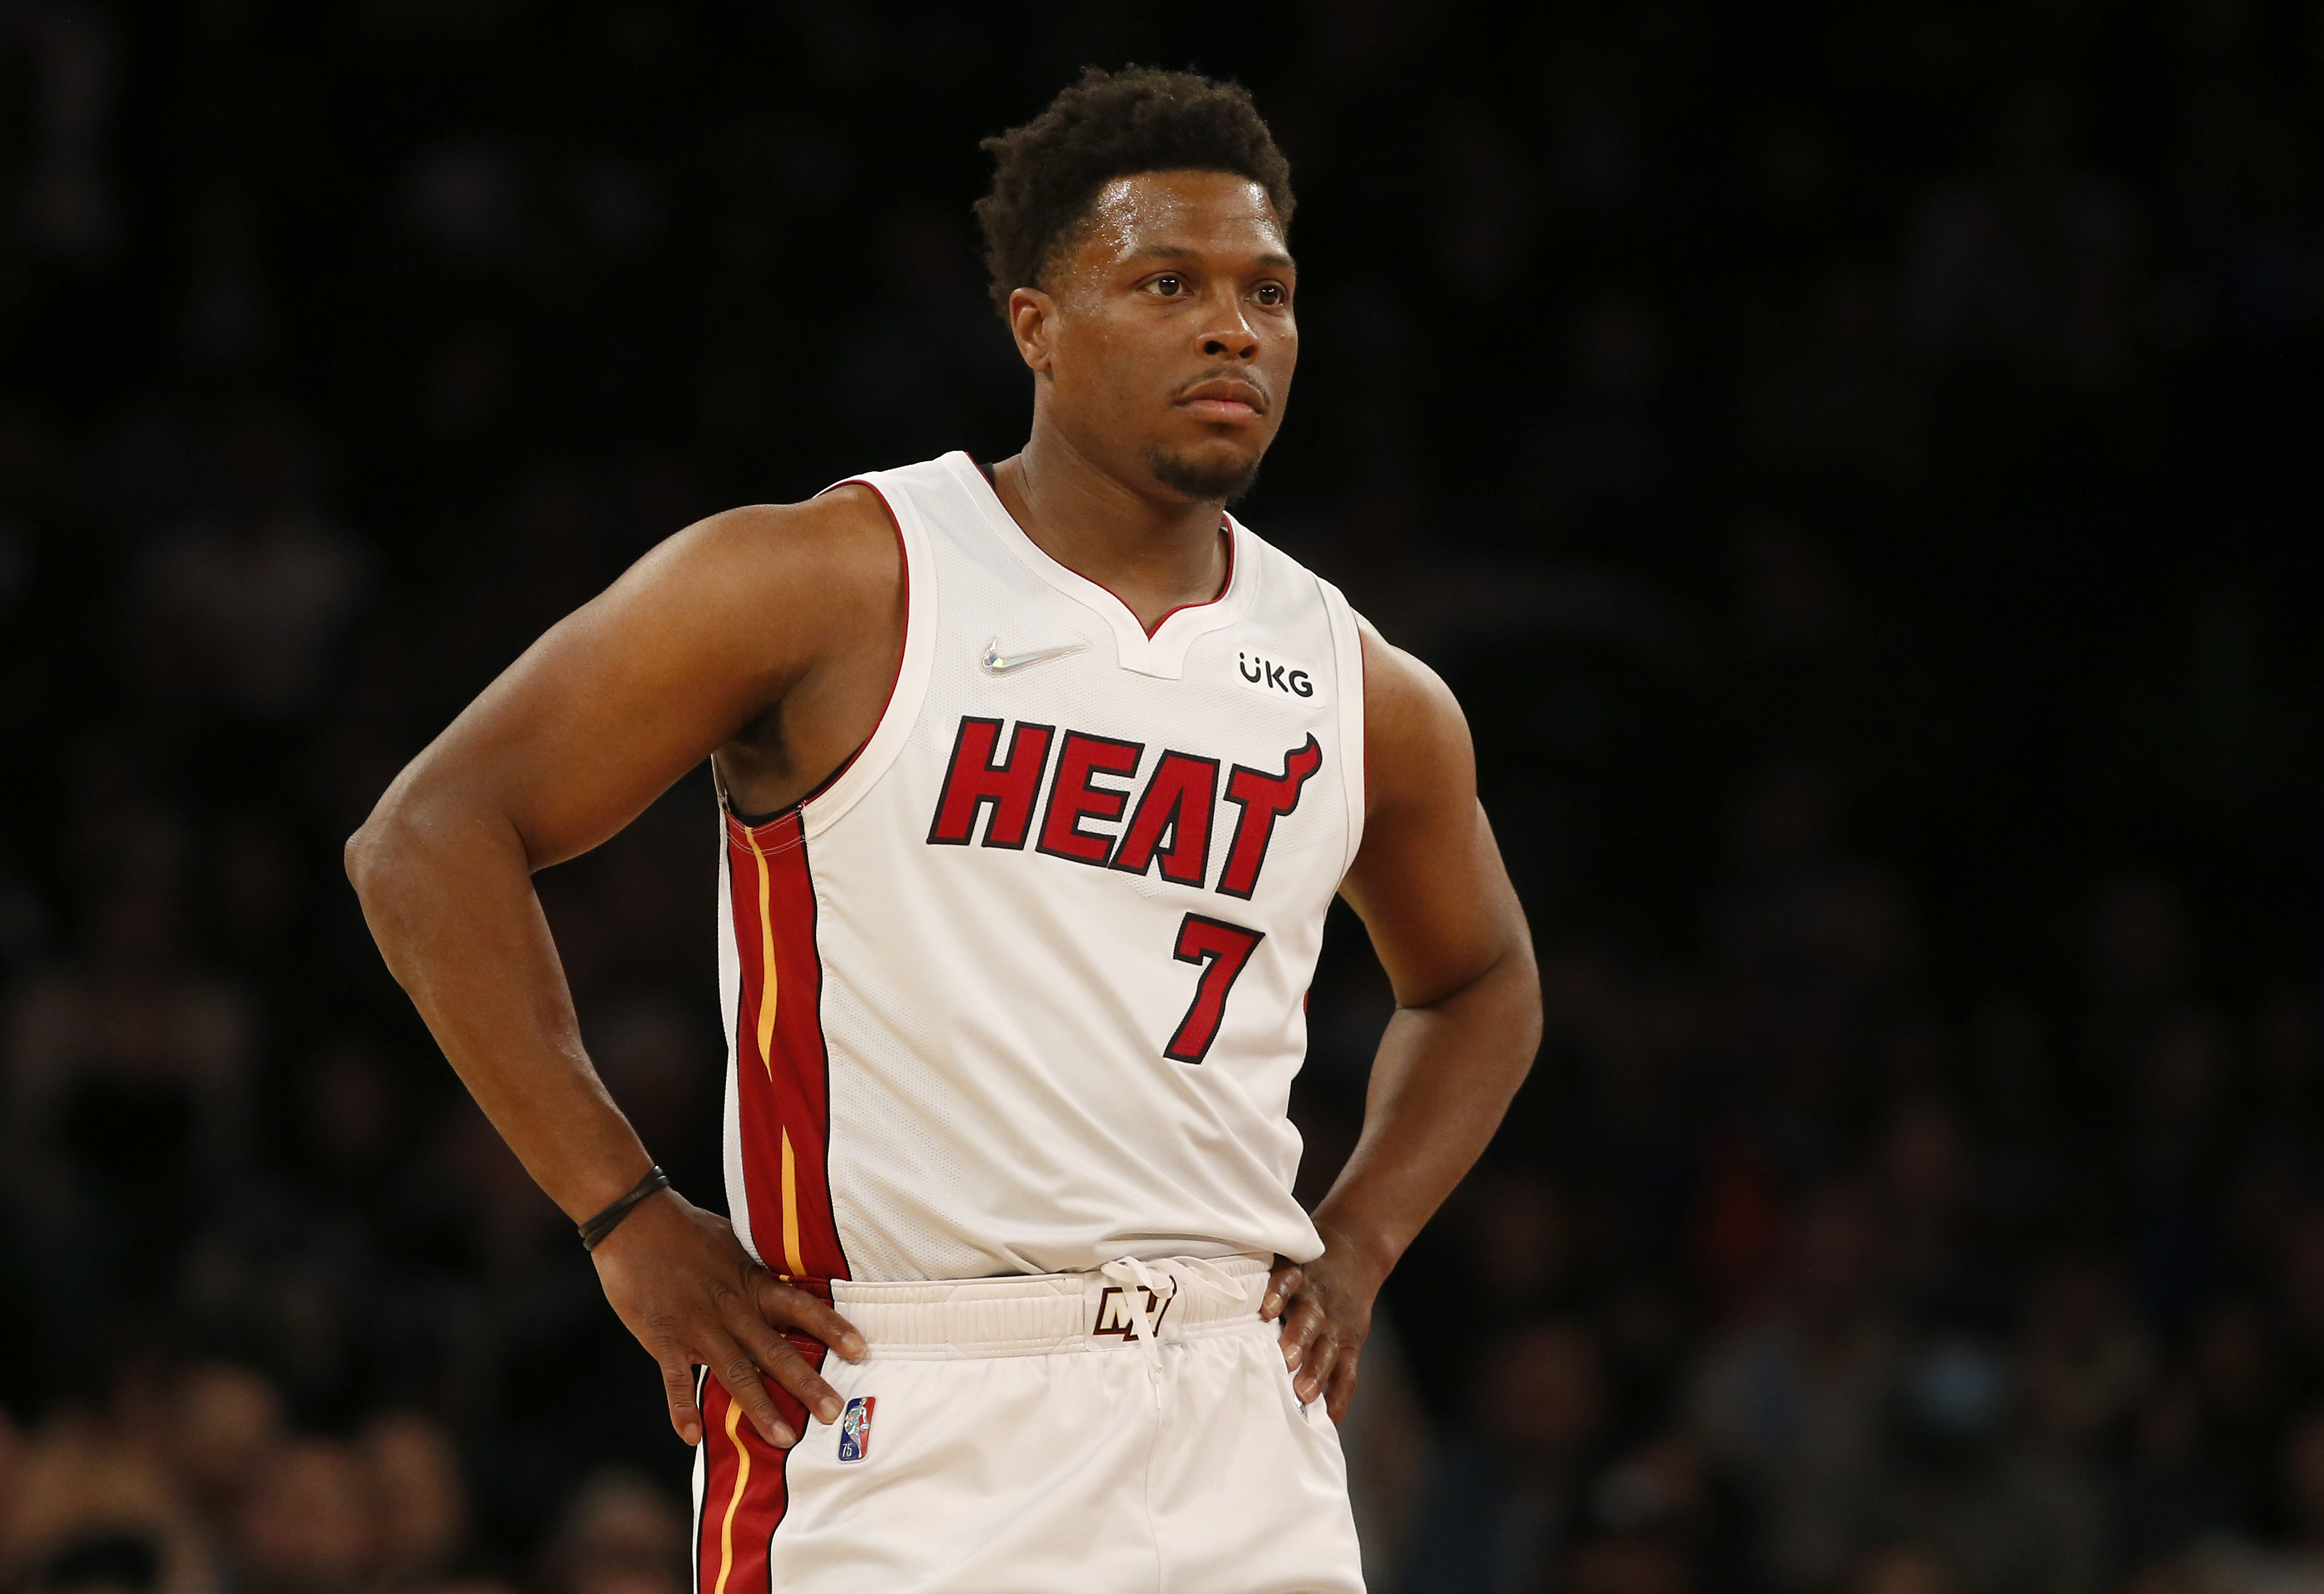 Miami Heat point guard Kyle Lowry looks on during an NBA game against the New York Knicks in February 2022